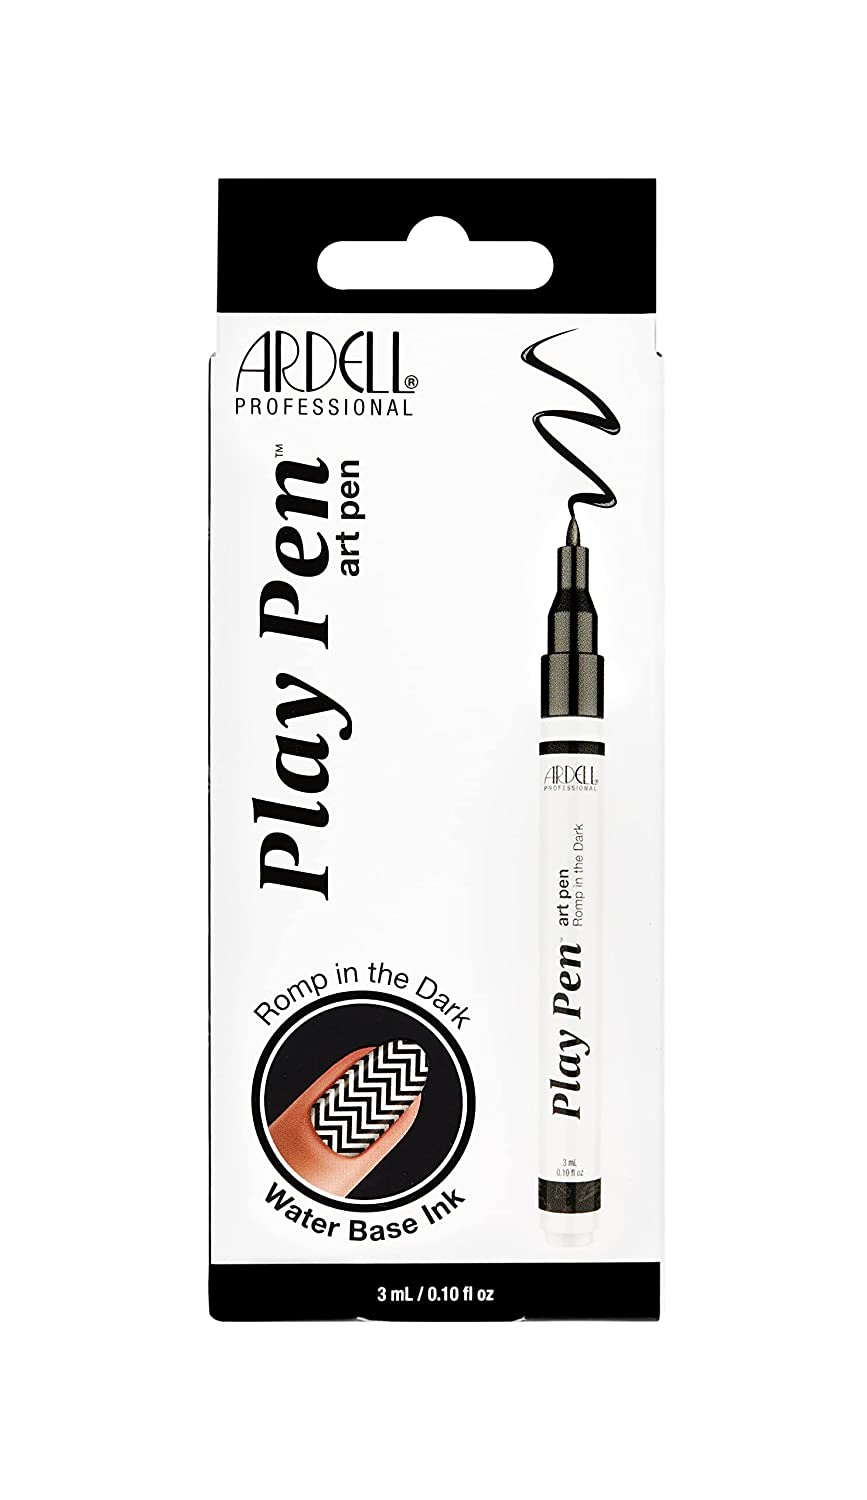 ARDELL Nailart Play Pen - Nail Polish Pen without UV Lamp, Nail Pen Nail Polish with Thin Brush for French, Patterns and Lines | French Pen for Nails - Black, ‎black